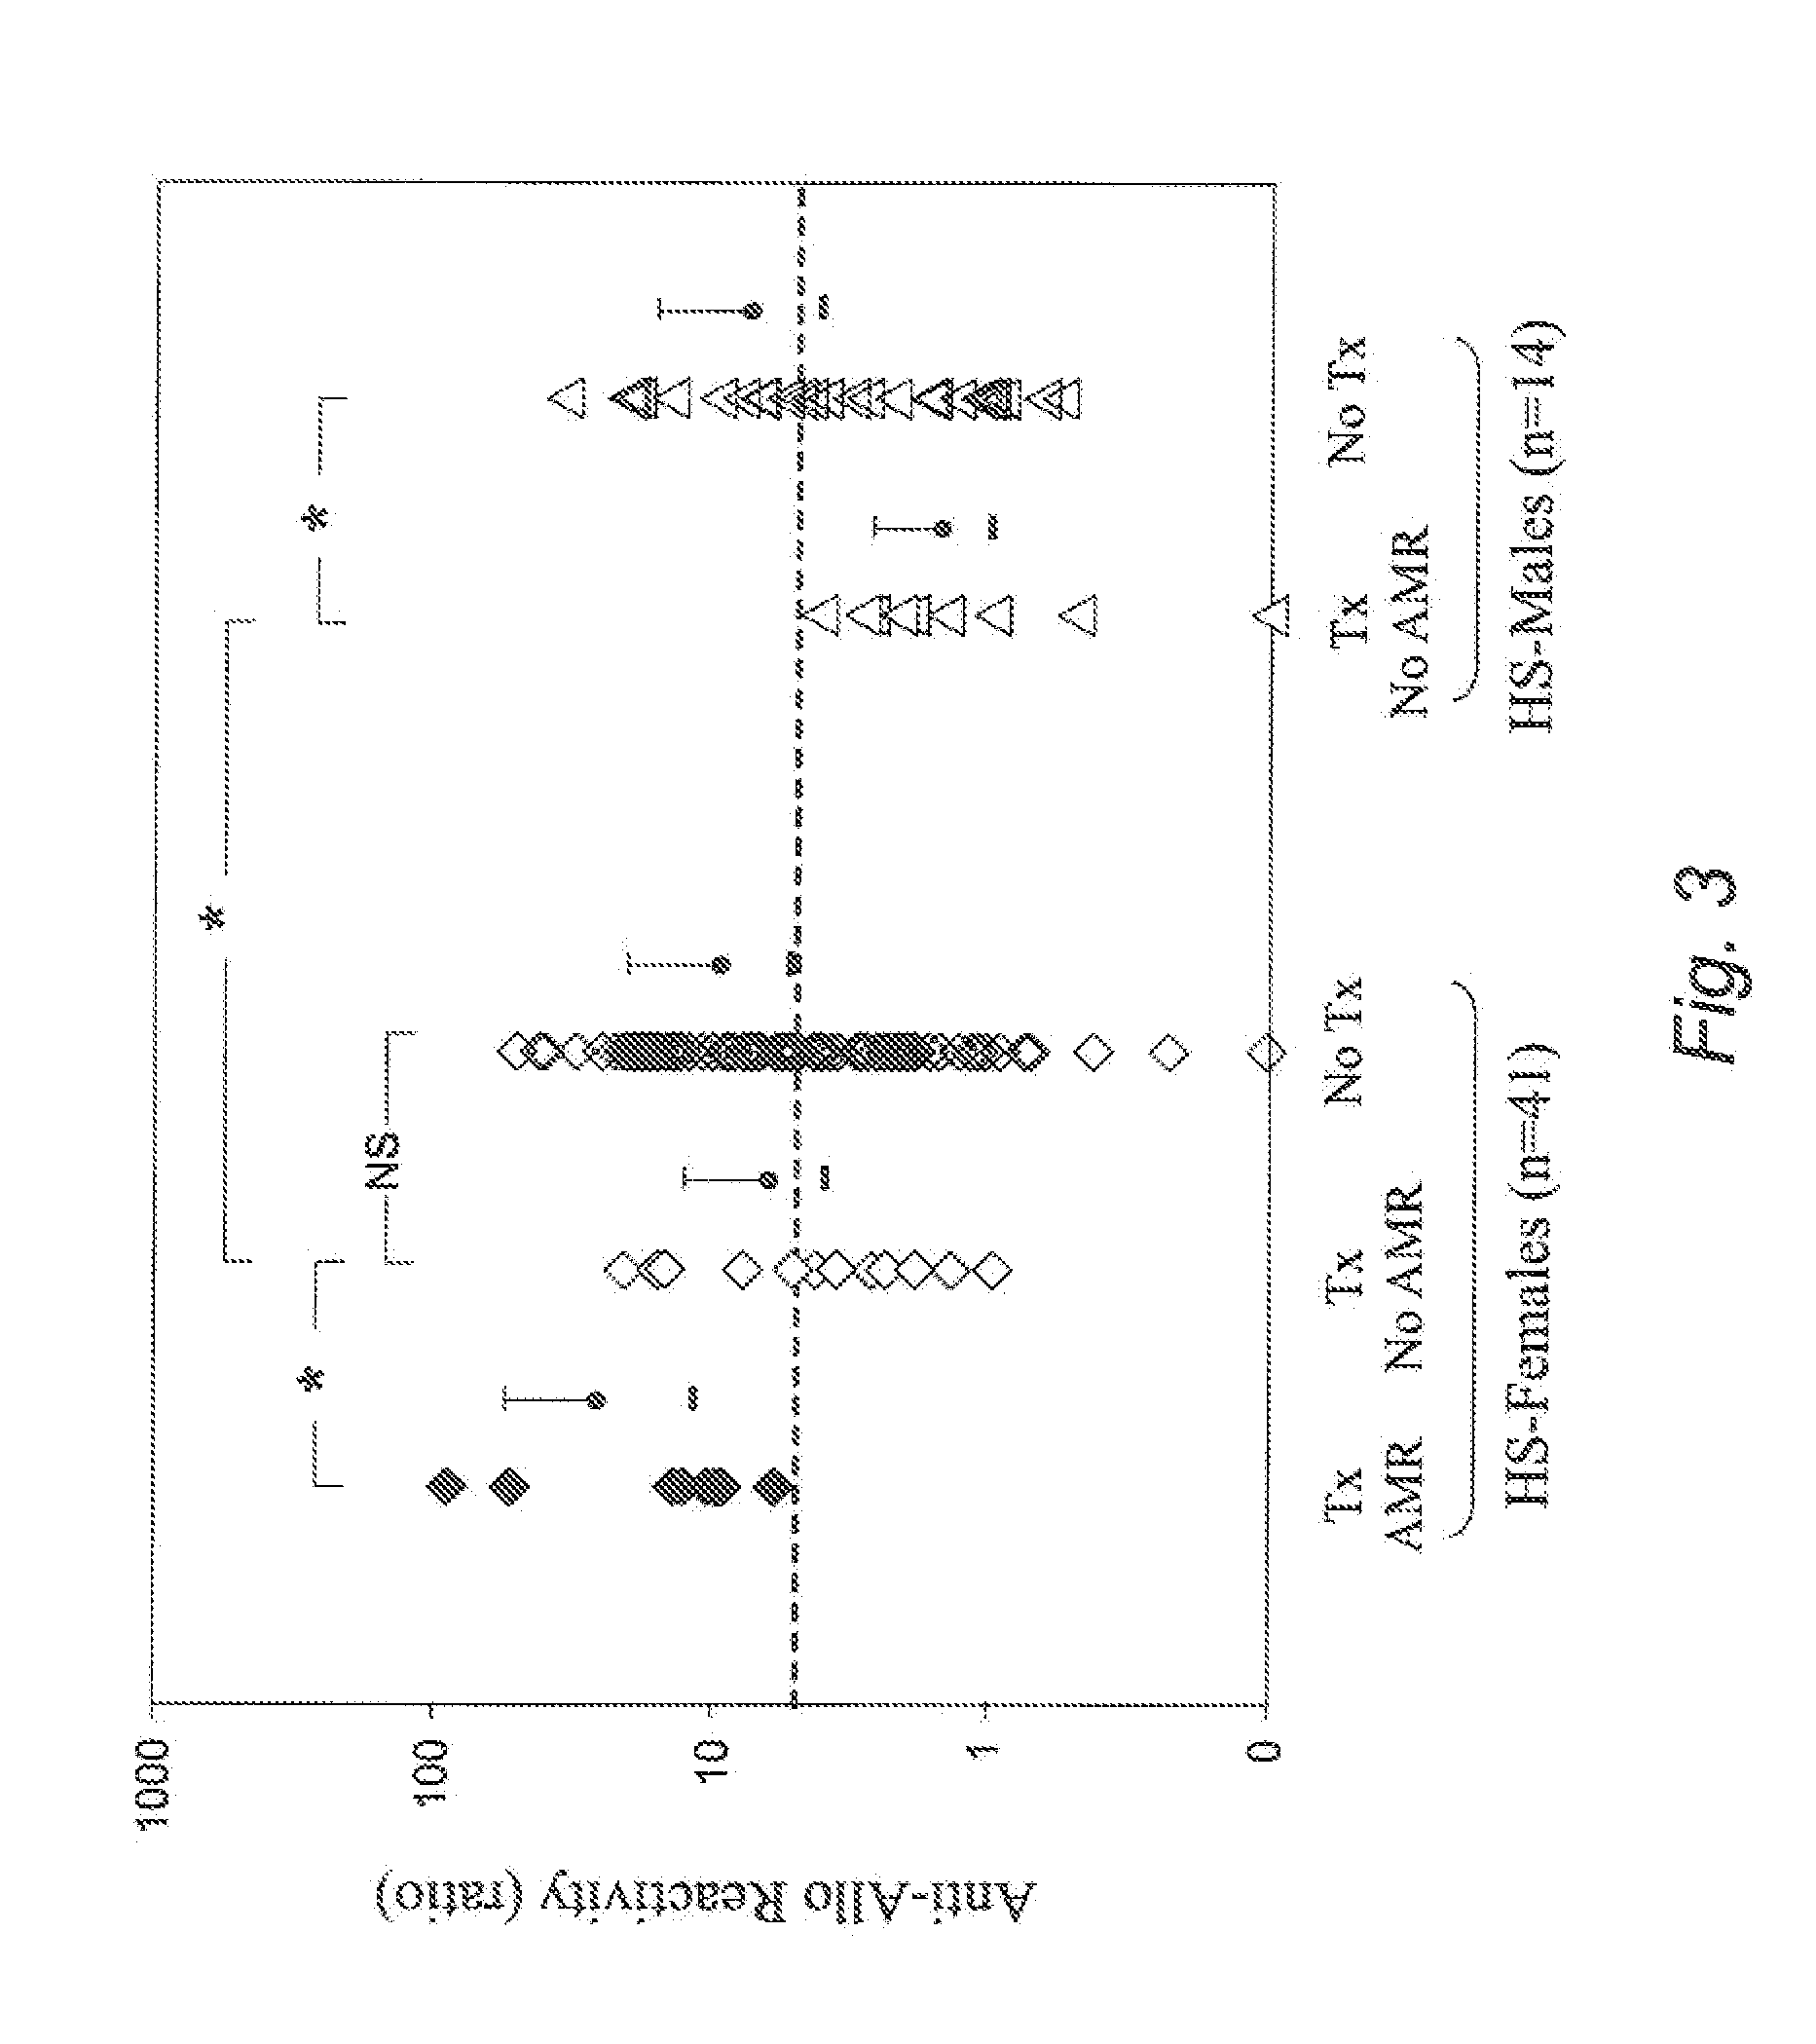 Methods of diagnosing and monitoring rejection mediated by antibodies